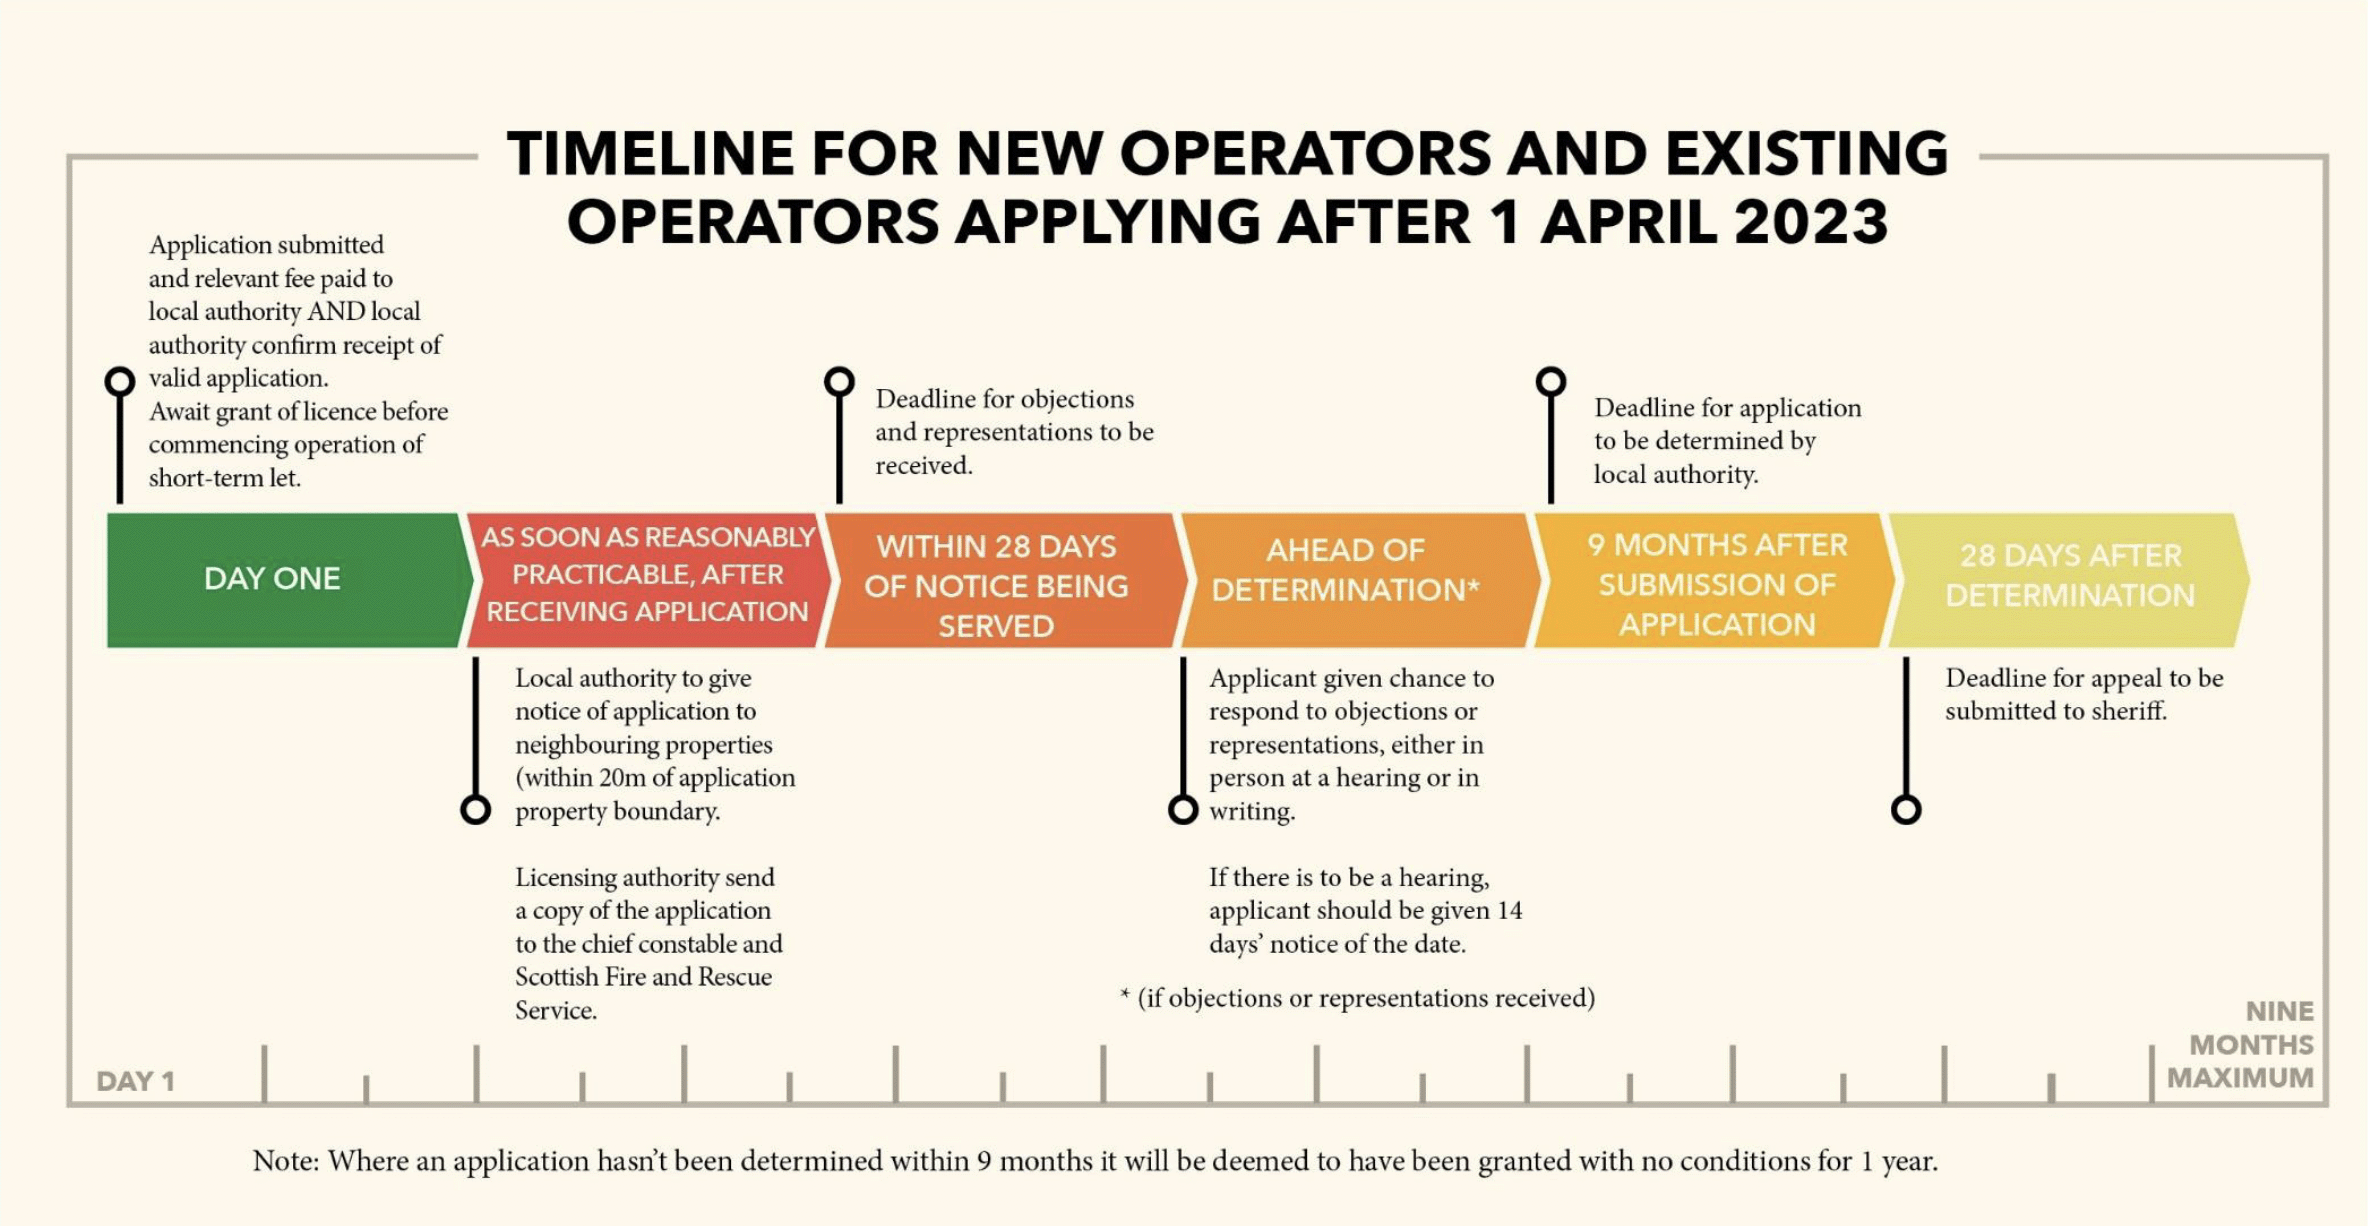 Diagram showing the timeline for determining an application for new operators and existing operators applying on or after 1 April 2023.